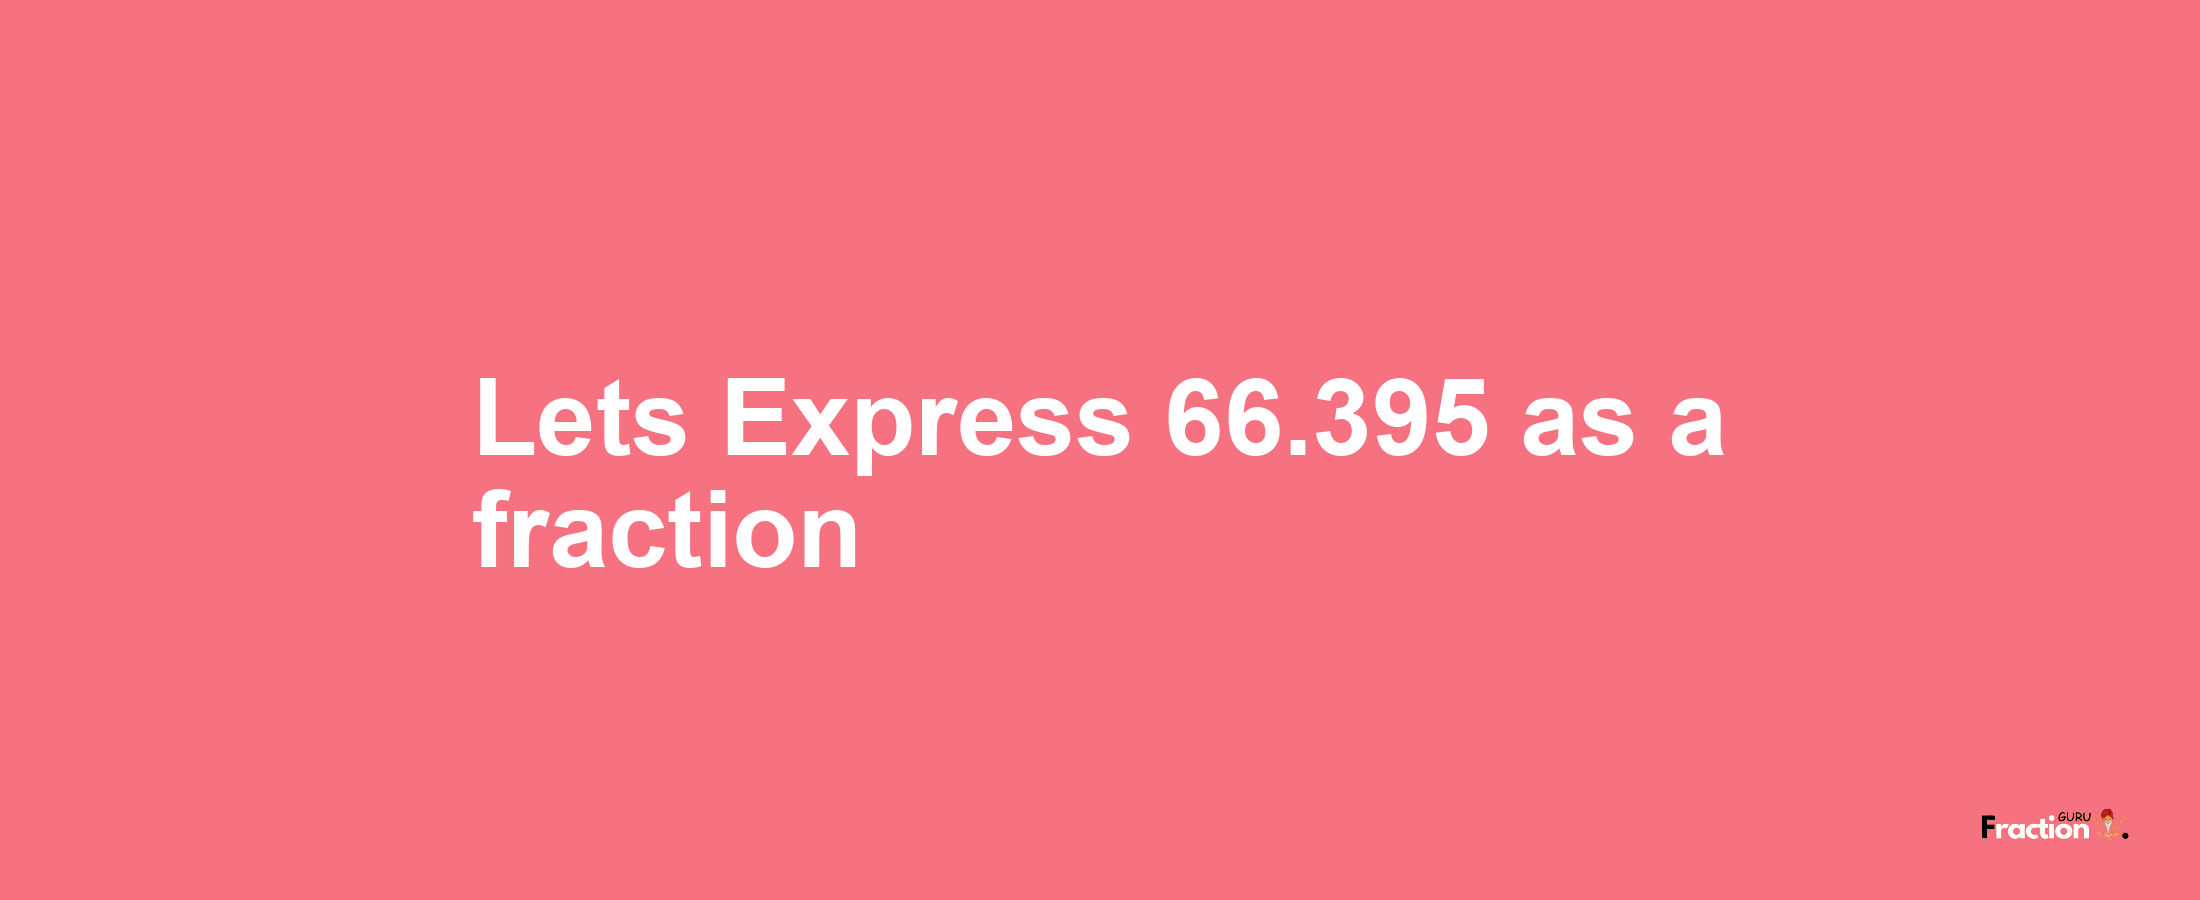 Lets Express 66.395 as afraction